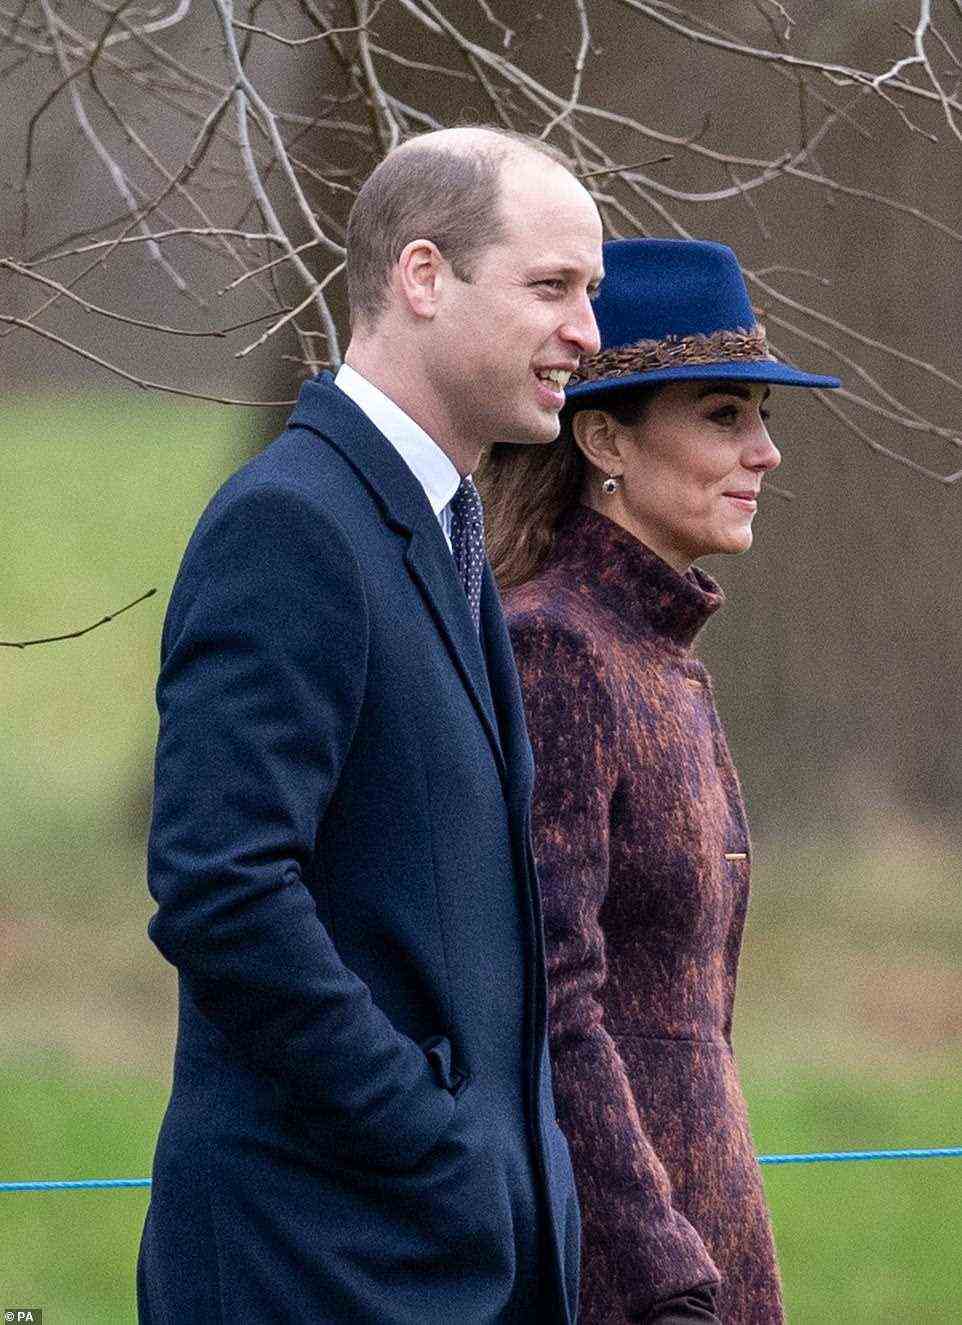 William likened the intimate podcast to 'a walk with my best mate or my wife', and listeners can hear his footsteps as he walks along describing the animals in fields around his home (Pictured: William walking with wife Kate Middleton, Duchess of Cambridge)